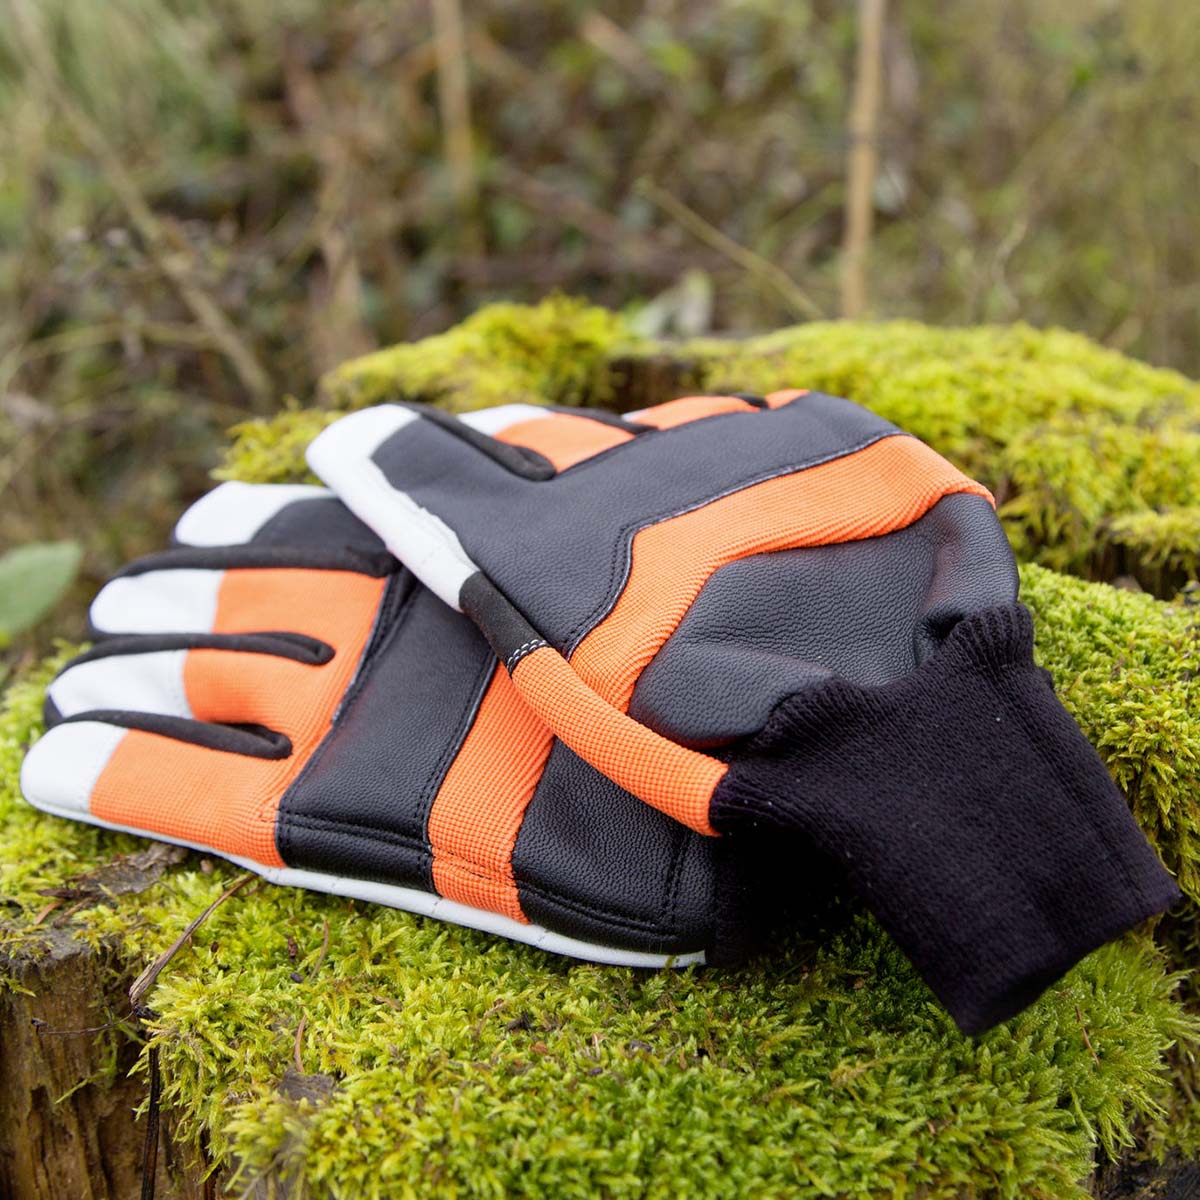 Chain Saw Glove Forester 9